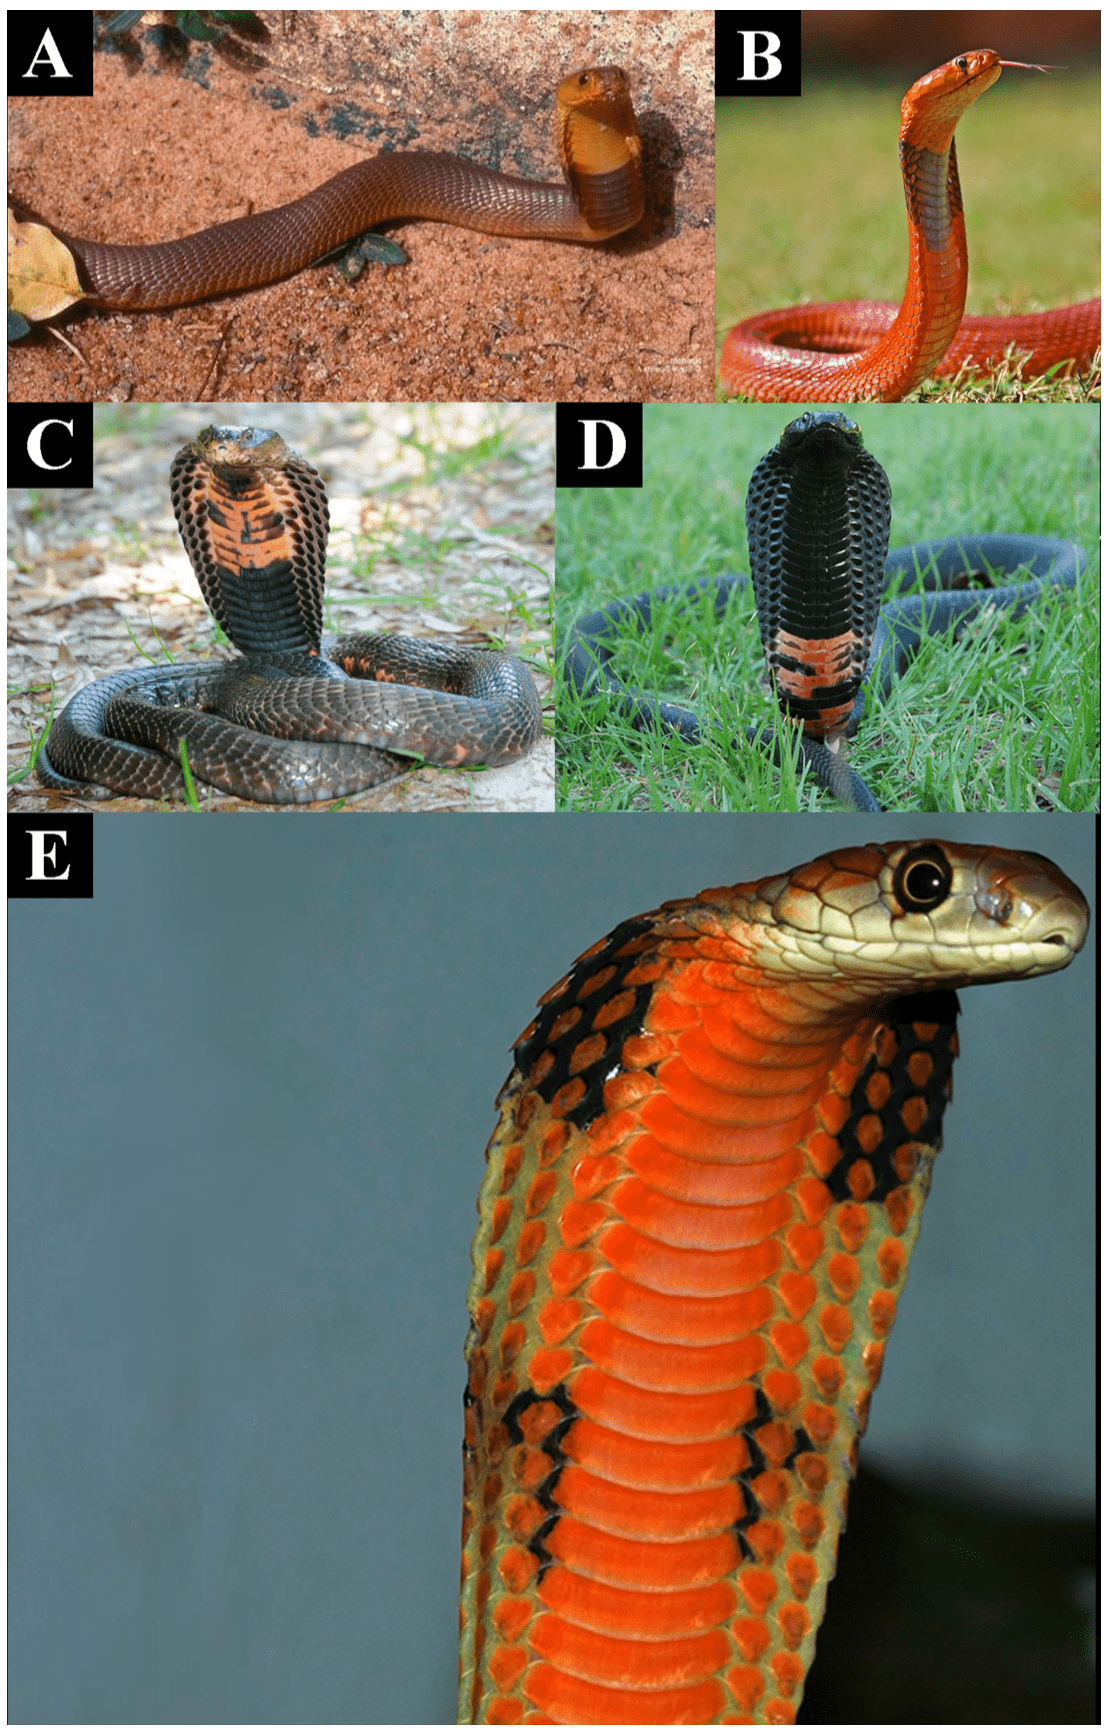 The cobra’s dramatic hood and its coloring is a defensive signal that indicates the extreme potency of its venom. Image credits: N. Panagides et al., 2017/Toxins